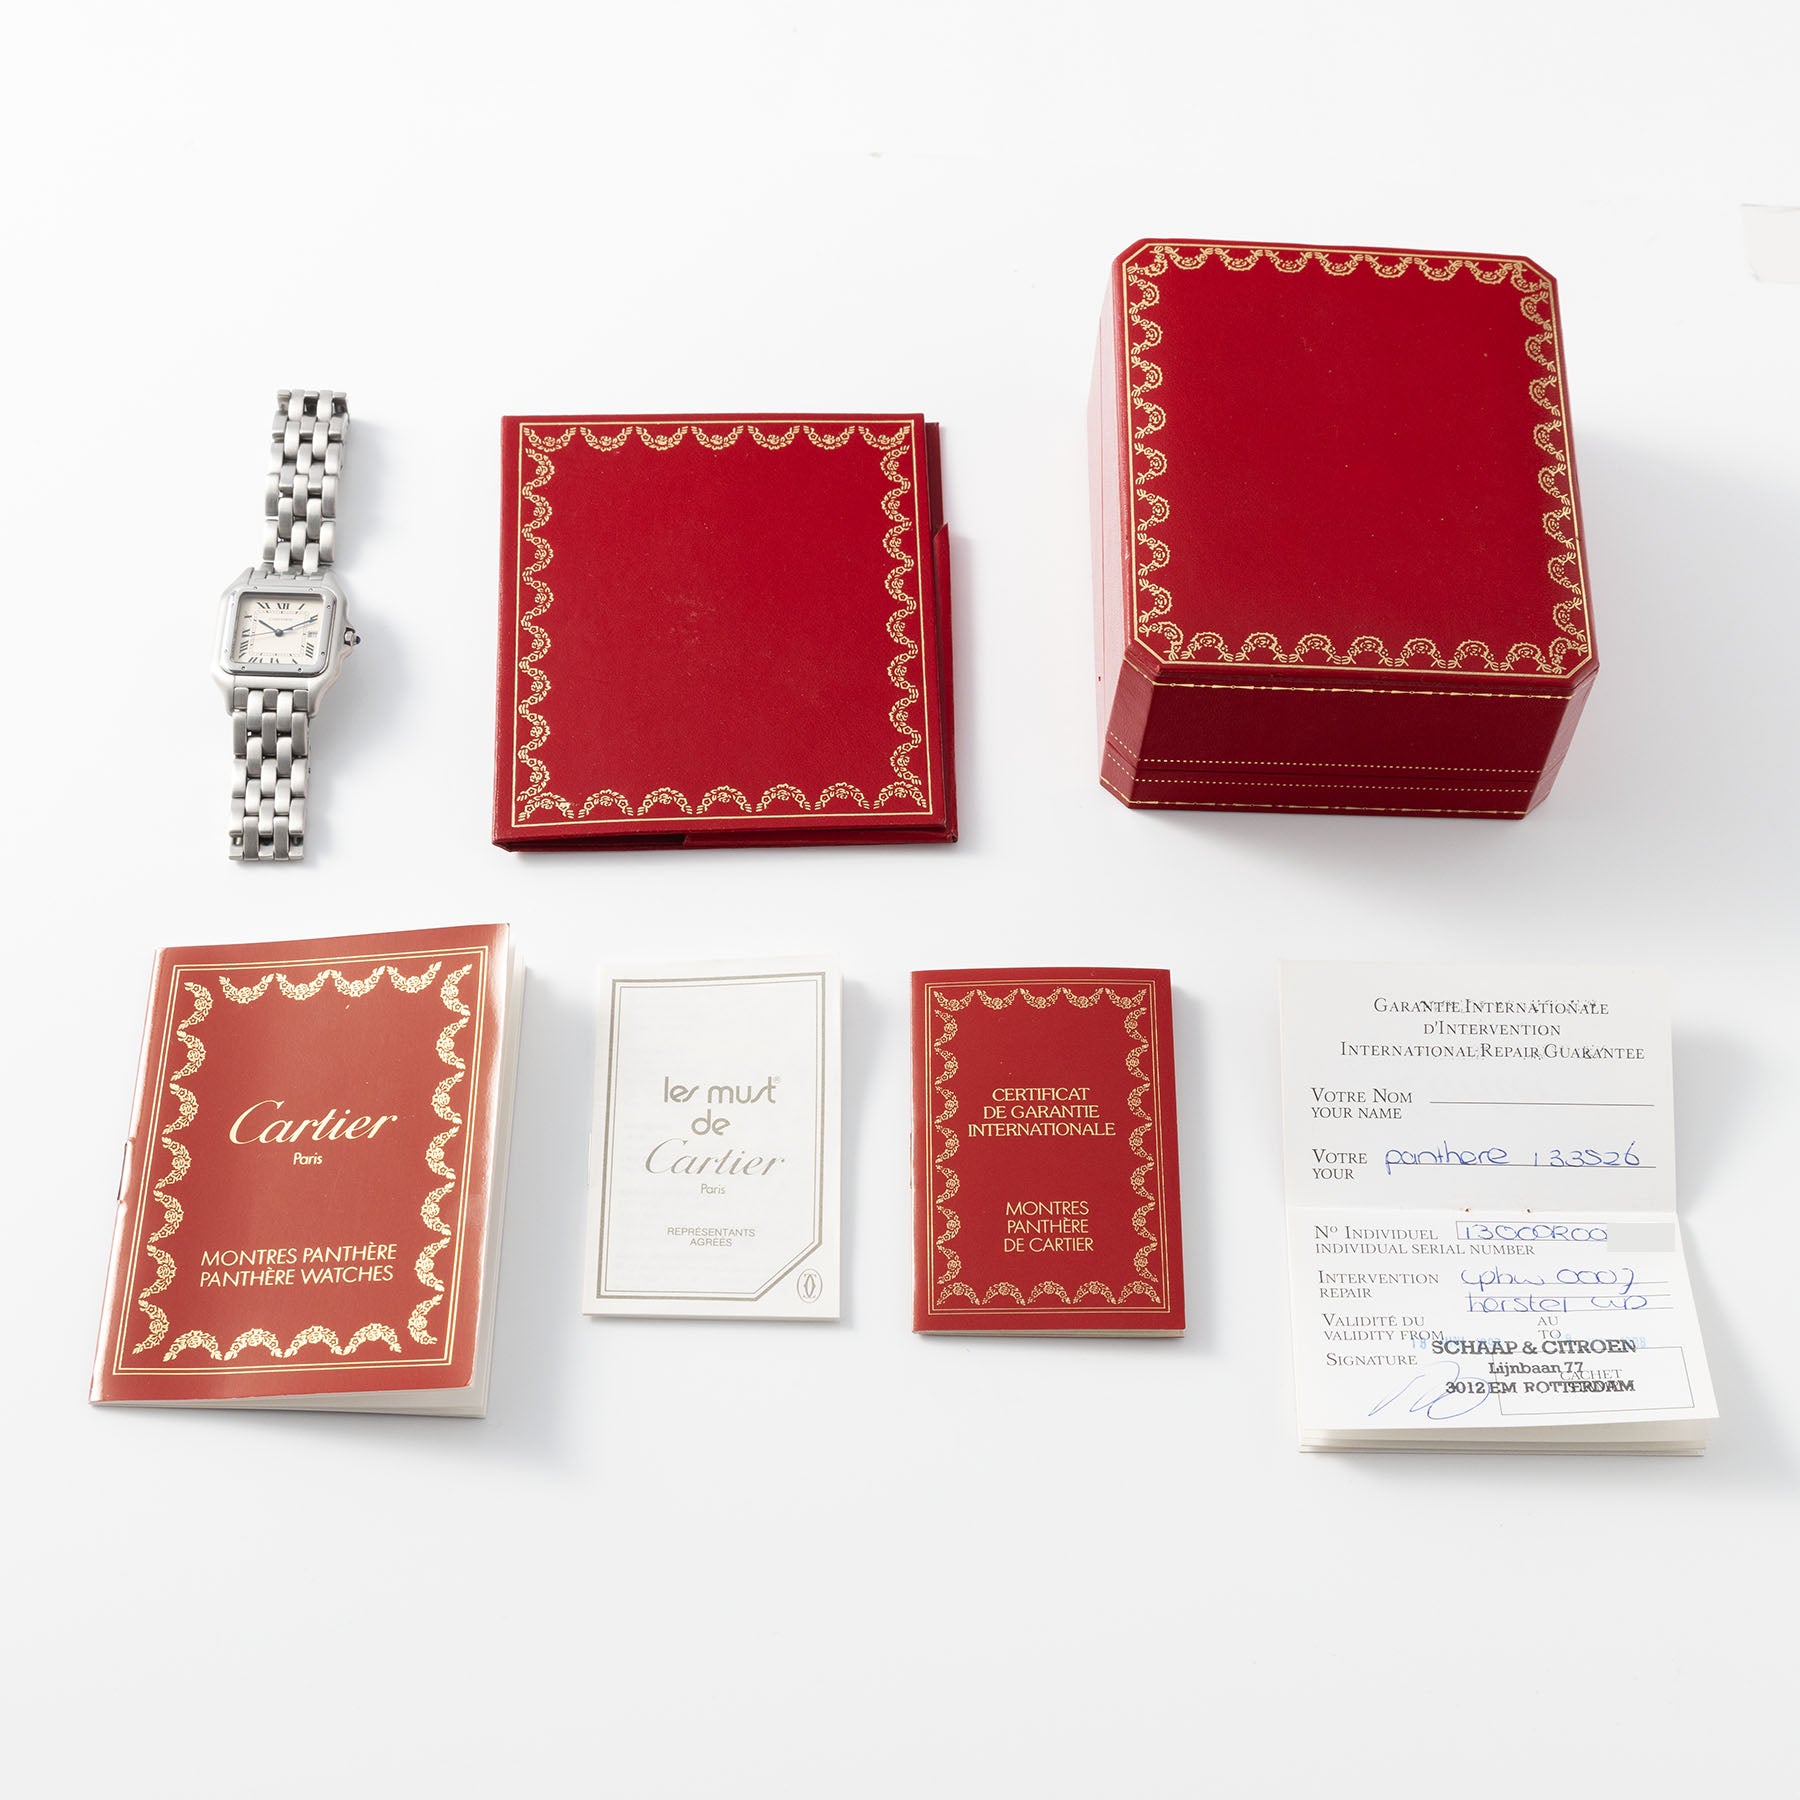 Cartier Panthere Steel Case Cream Dial Box and Papers